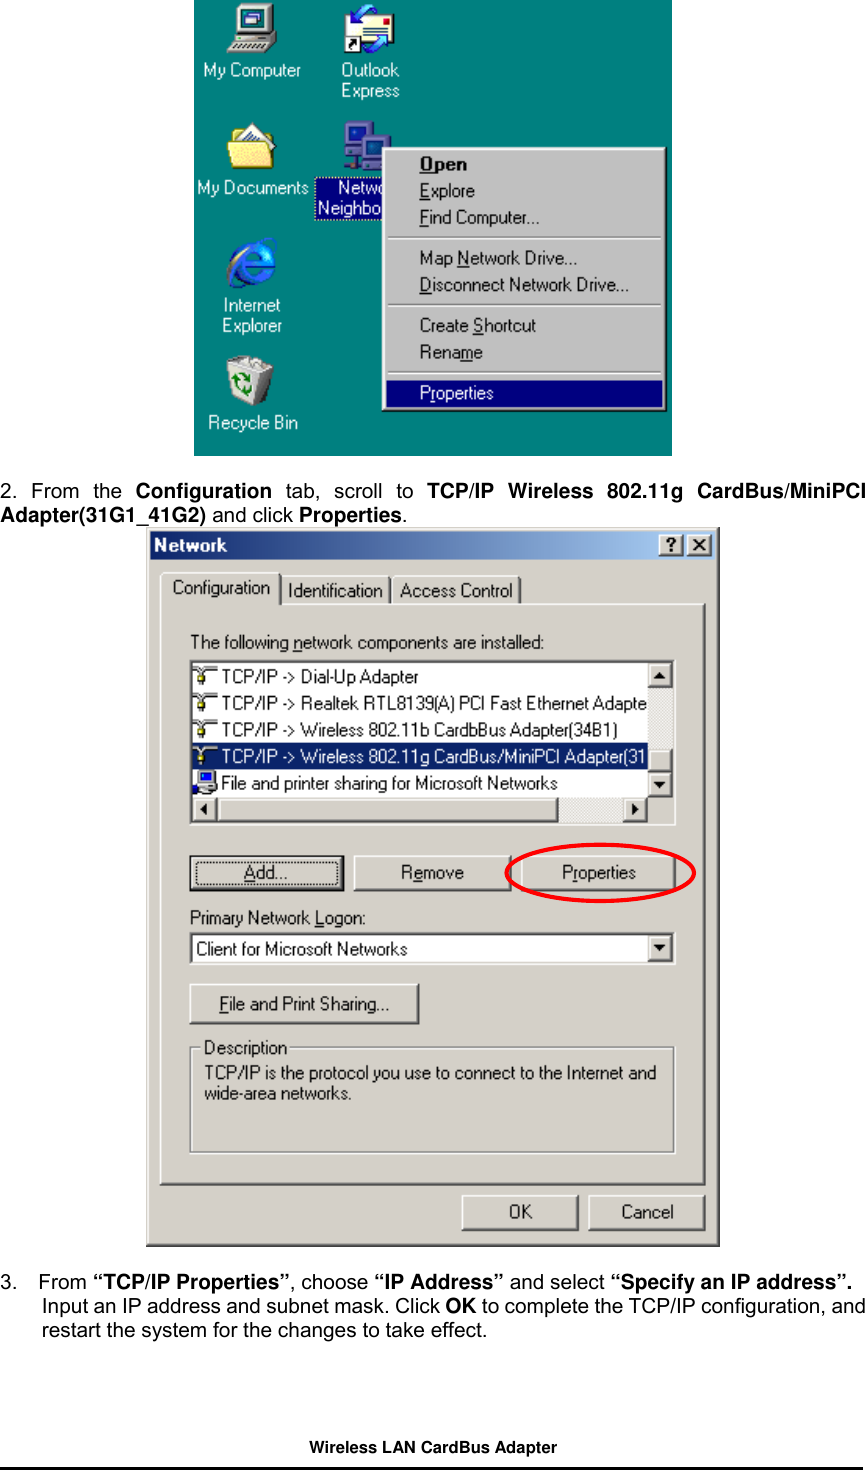   2. From the Configuration tab, scroll to TCP/IP Wireless 802.11g CardBus/MiniPCI Adapter(31G1_41G2) and click Properties.   3.  From “TCP/IP Properties”, choose “IP Address” and select “Specify an IP address”. Input an IP address and subnet mask. Click OK to complete the TCP/IP configuration, and restart the system for the changes to take effect. Wireless LAN CardBus Adapter 